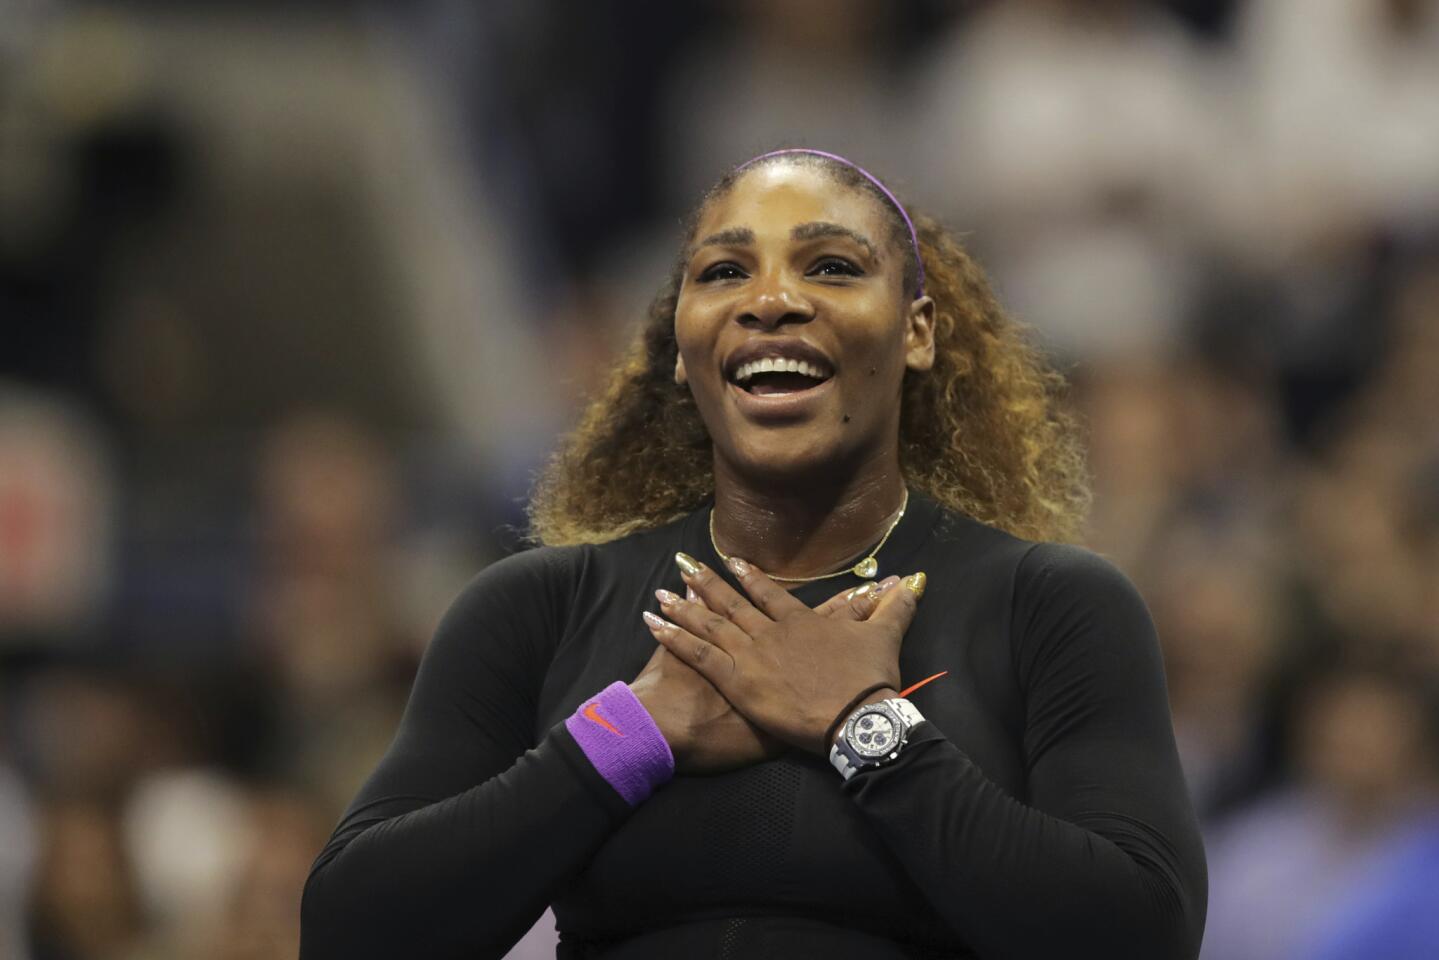 Serena Williams reacts after defeating Elina Svitolina after their Women's Singles semifinal match inside the Billie Jean King National Tennis Center in Queens on Sept. 5, 2019.